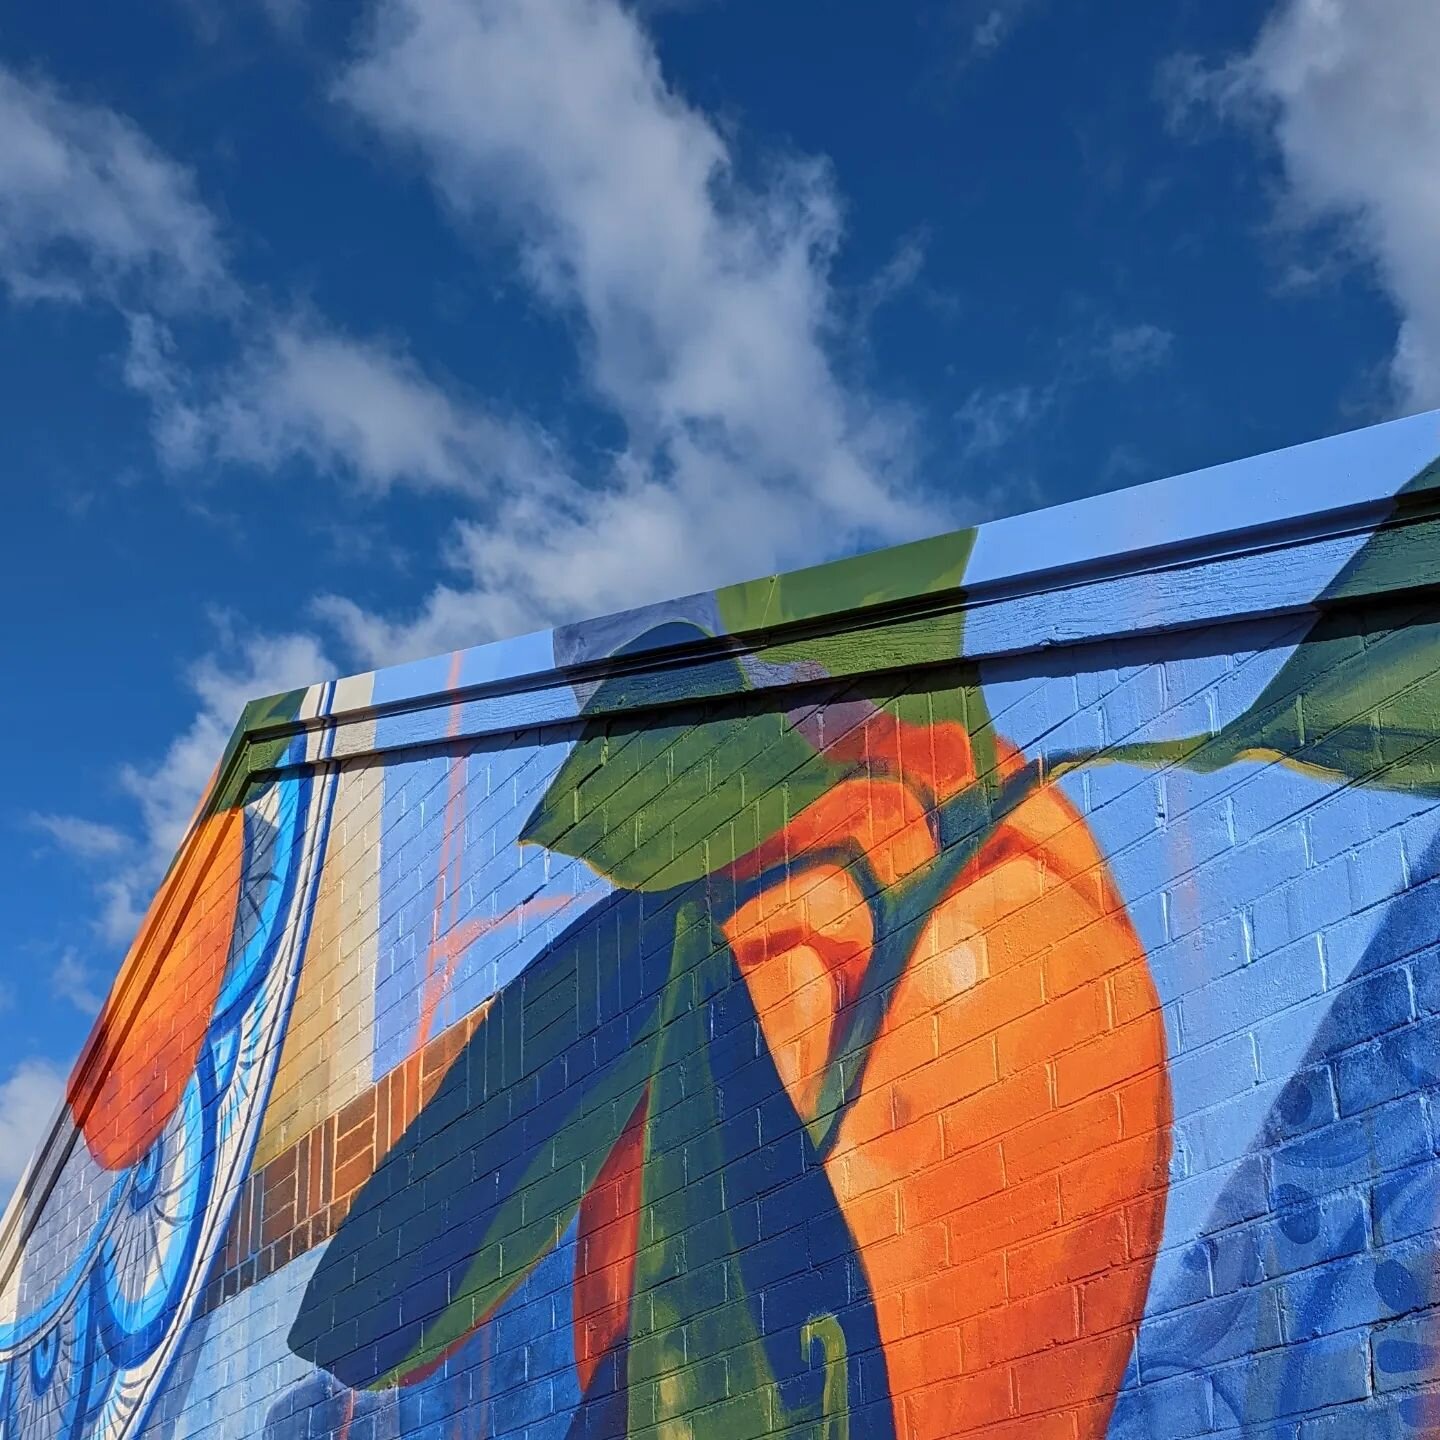 Loving the beautiful blue colours blending the mural and sky together. 

#bannalanefestival #visitgriffith #clairefoxton #laneway #nonnastable #art #painting